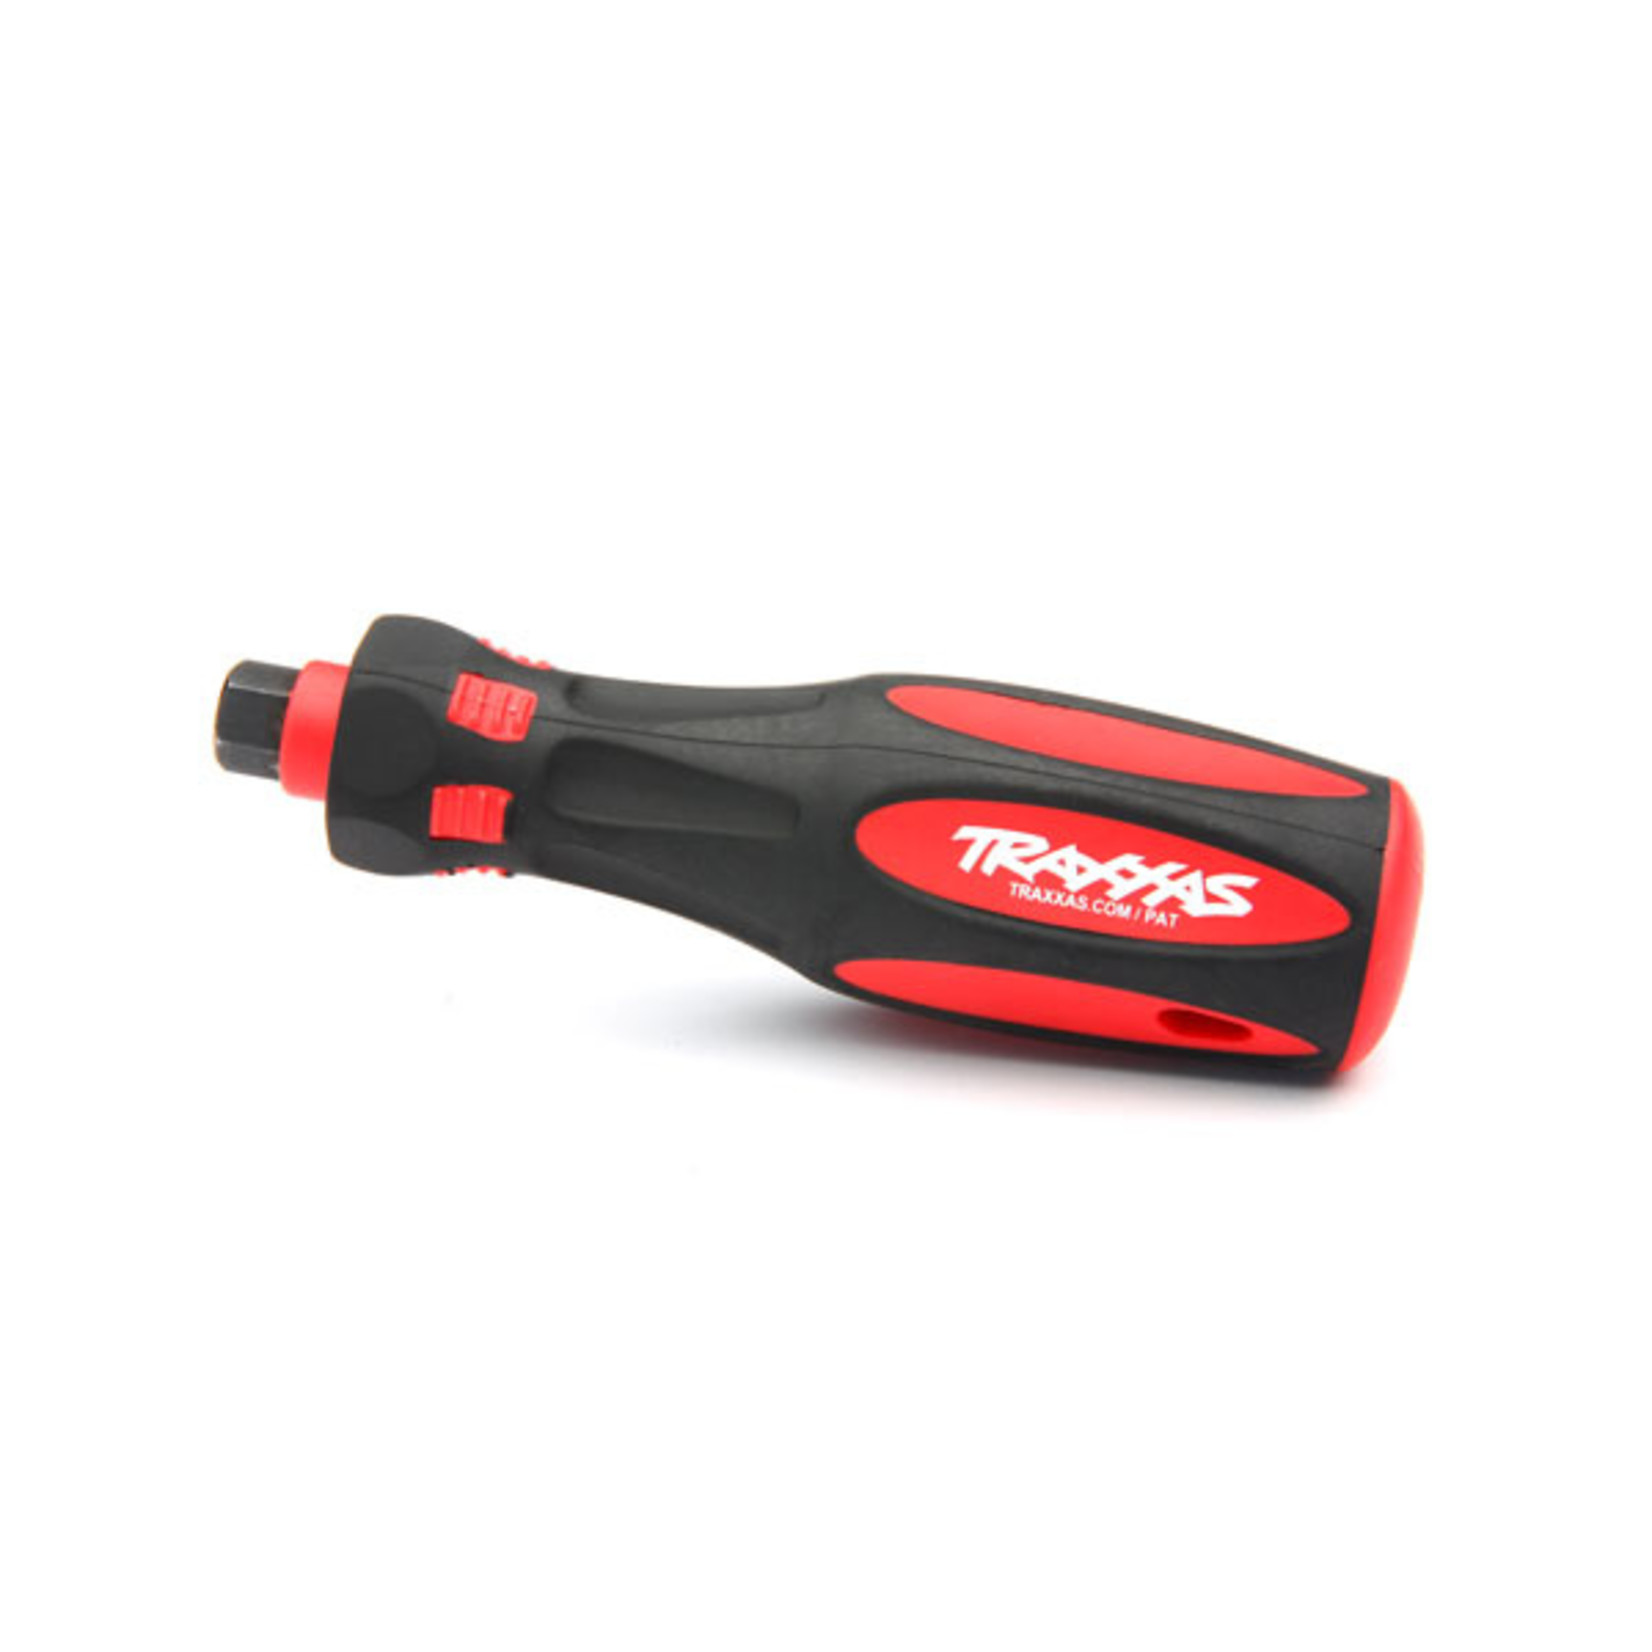 Traxxas 8720 - Speed bit handle, large (overmolded)